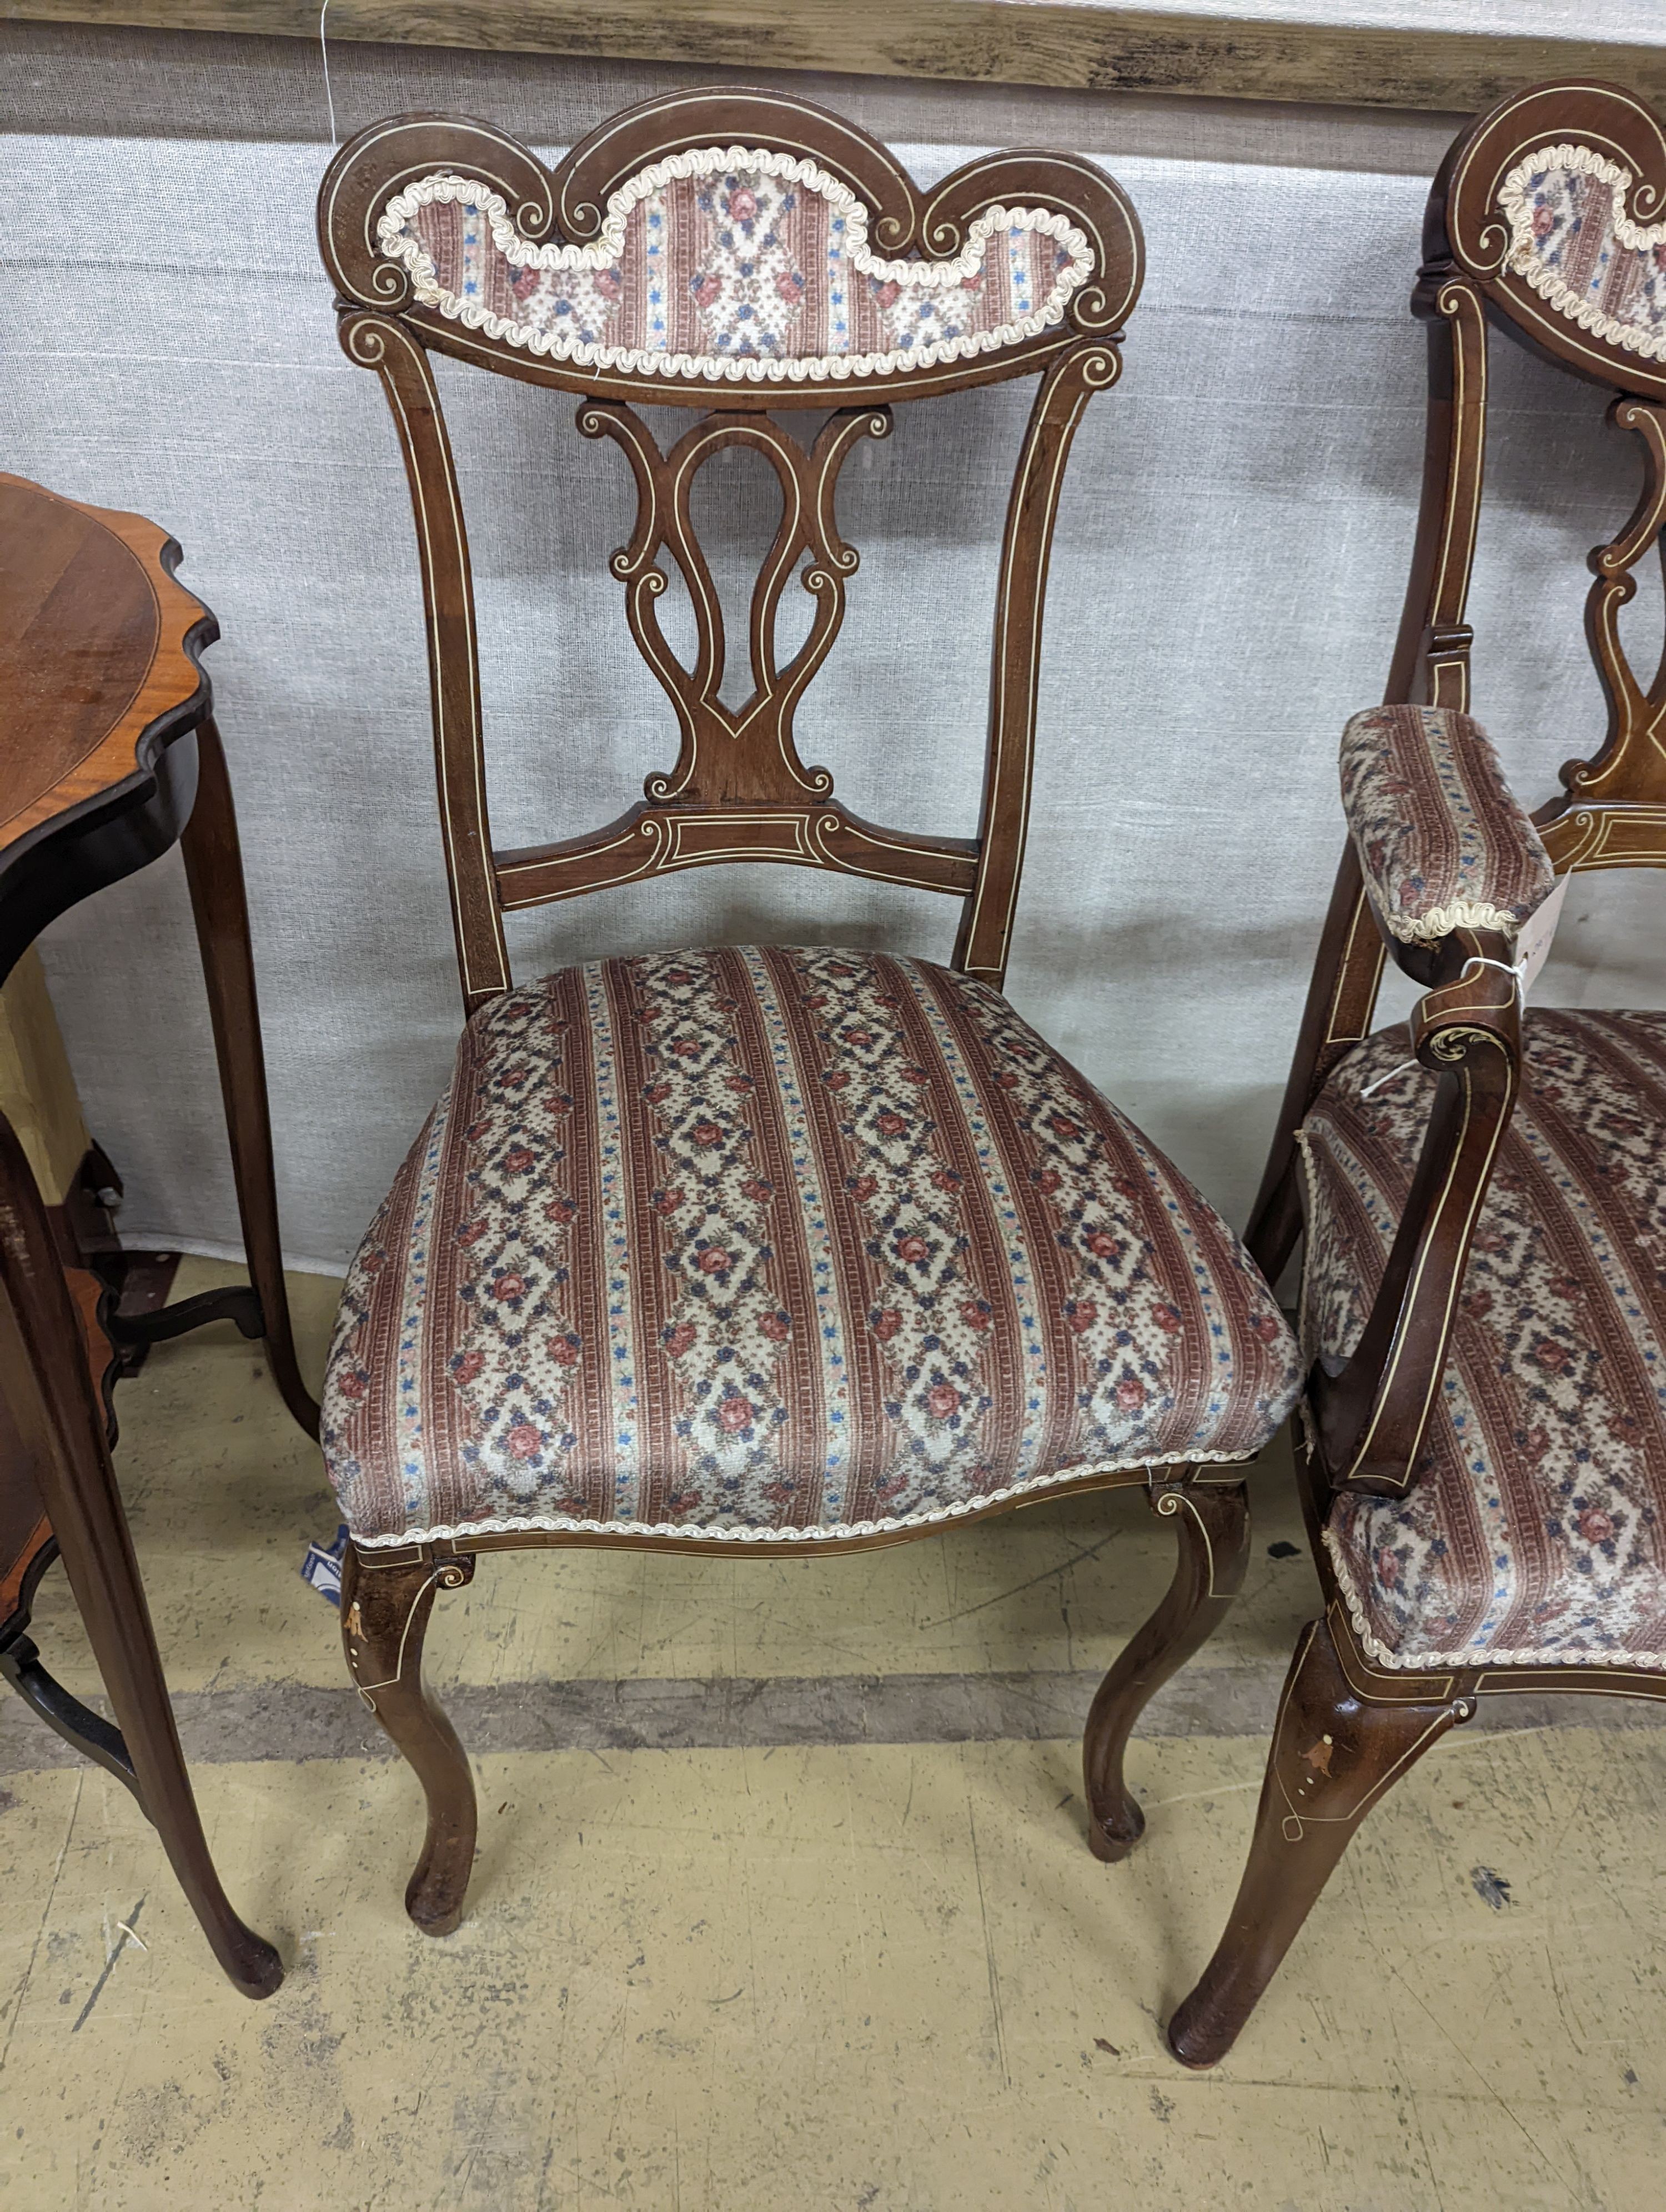 Three late Victorian bone inlaid mahogany chairs, two with arms, together with an Edwardian oval satinwood banded occasional table.